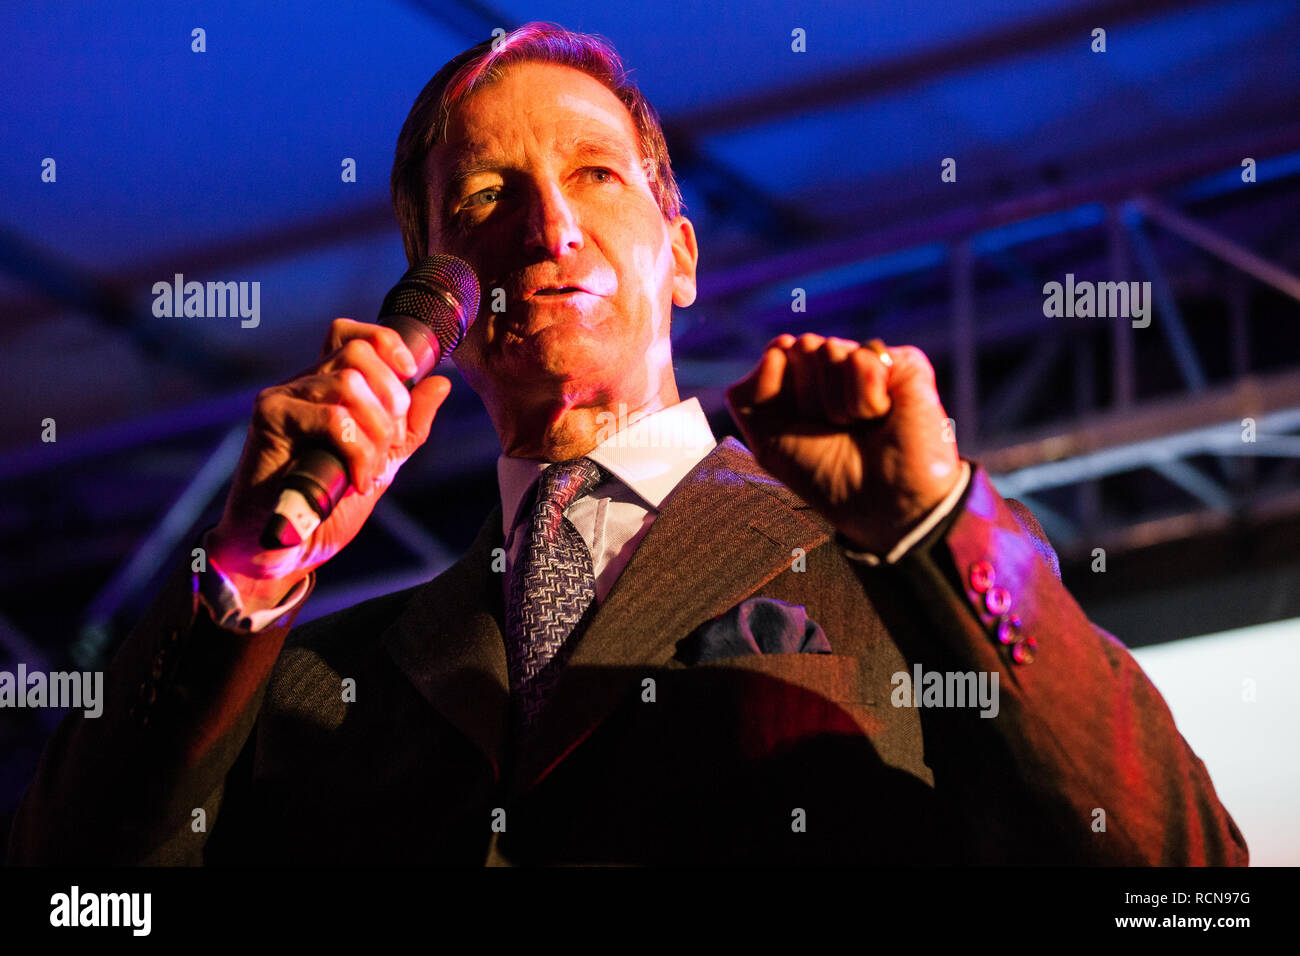 London, UK. 15th January, 2019. Dominic Grieve, Conservative MP for Beaconsfield, addresses pro-EU activists attending a People's Vote rally in Parliament Square as MPs vote in the House of Commons on Prime Minister Theresa May's proposed final Brexit withdrawal agreement. Credit: Mark Kerrison/Alamy Live News Stock Photo